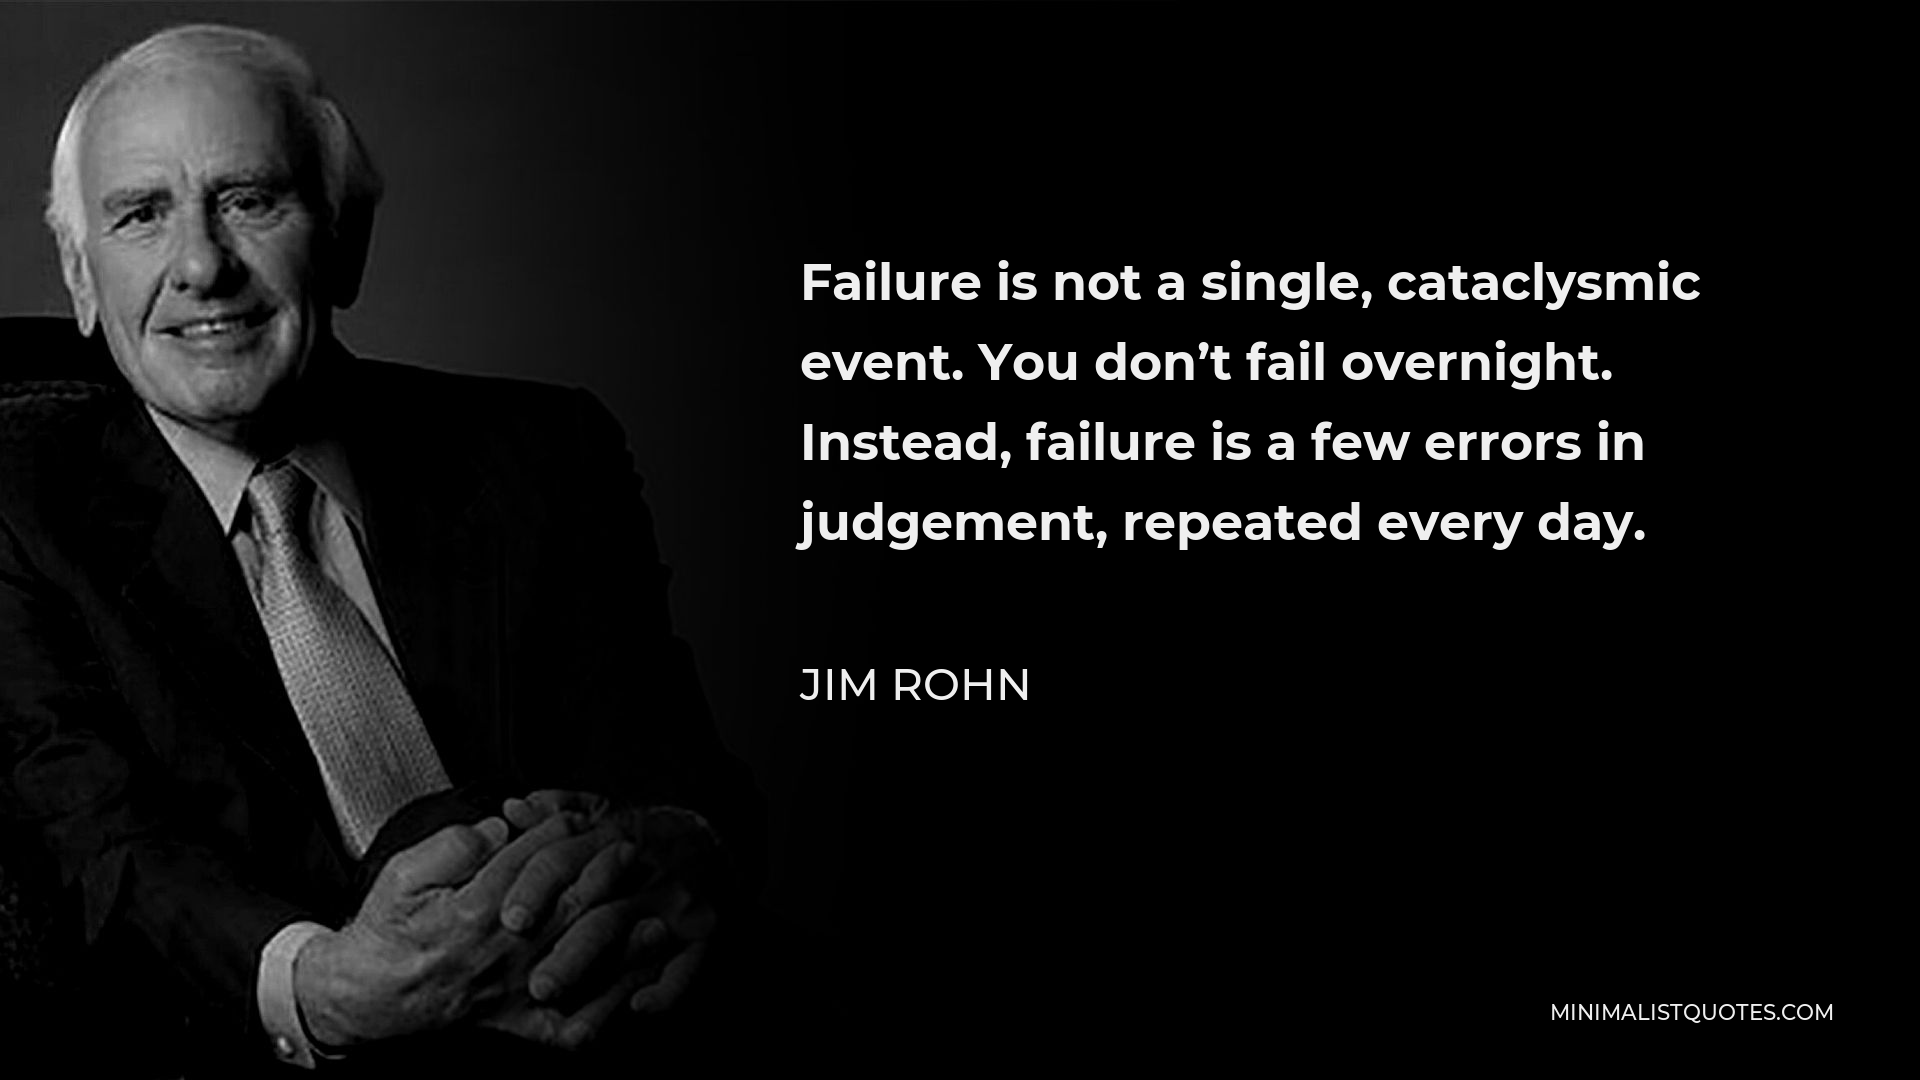 Jim Rohn Quote - Failure is not a single, cataclysmic event. You don’t fail overnight. Instead, failure is a few errors in judgement, repeated every day.